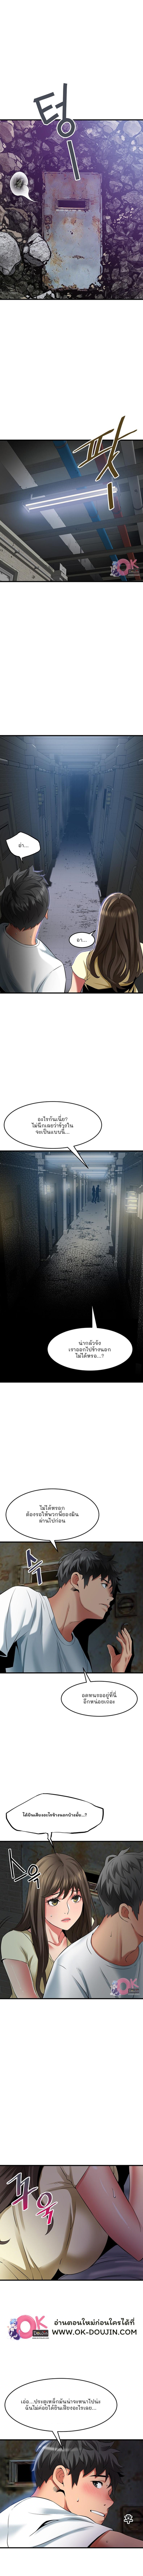 An Alley Story 42 ภาพที่ 6